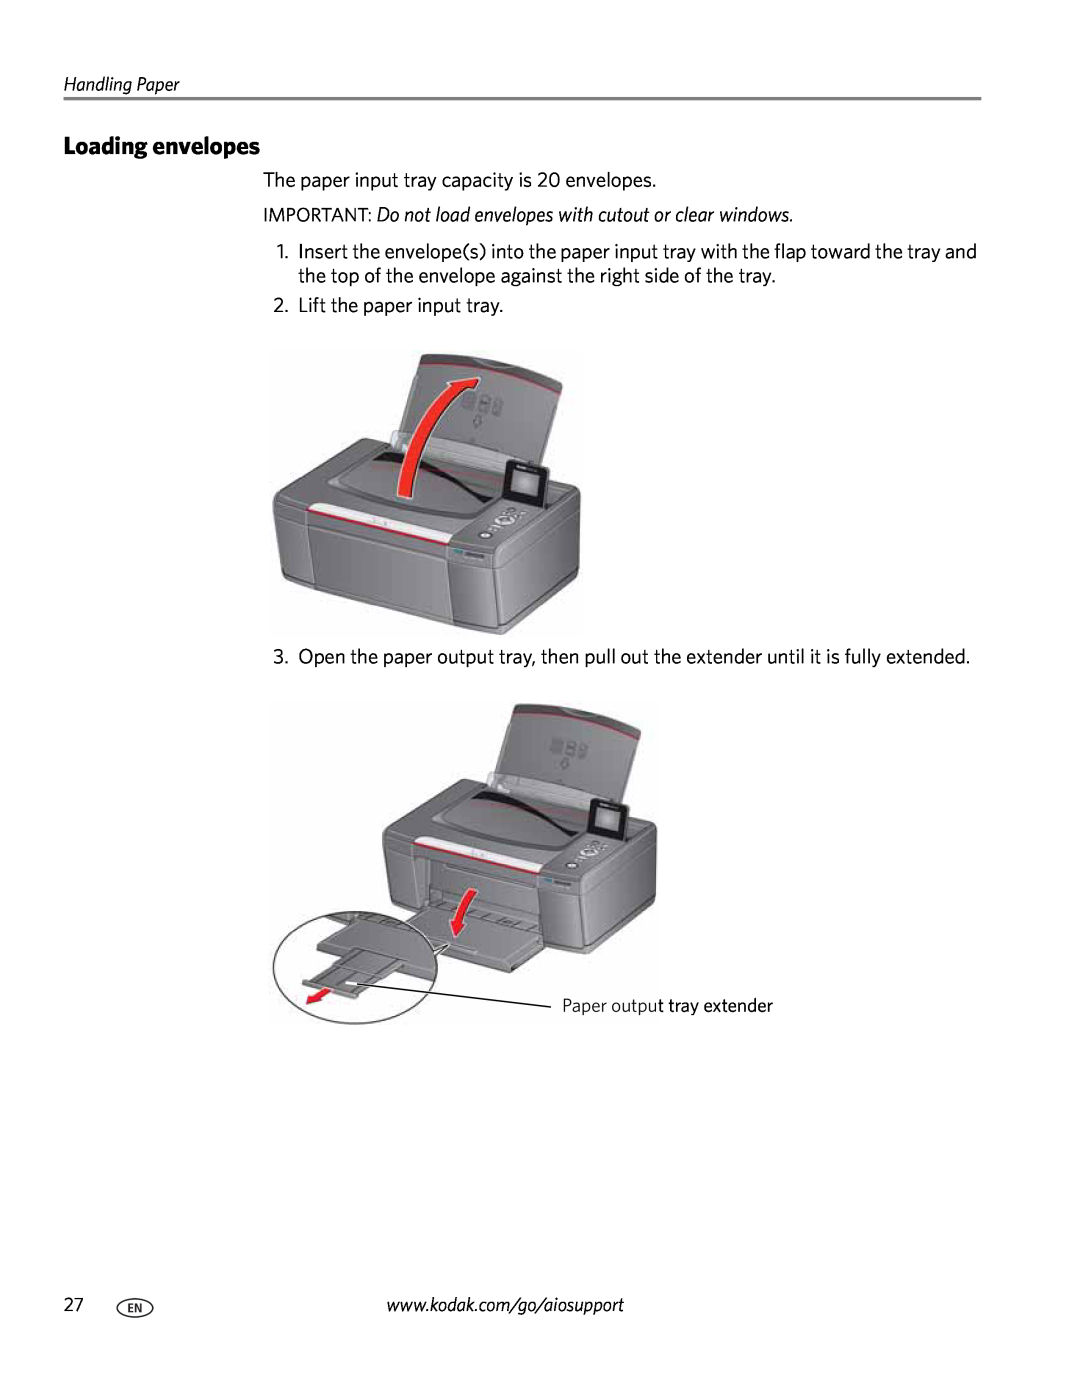 Kodak 3.1 manual Loading envelopes, IMPORTANT Do not load envelopes with cutout or clear windows 